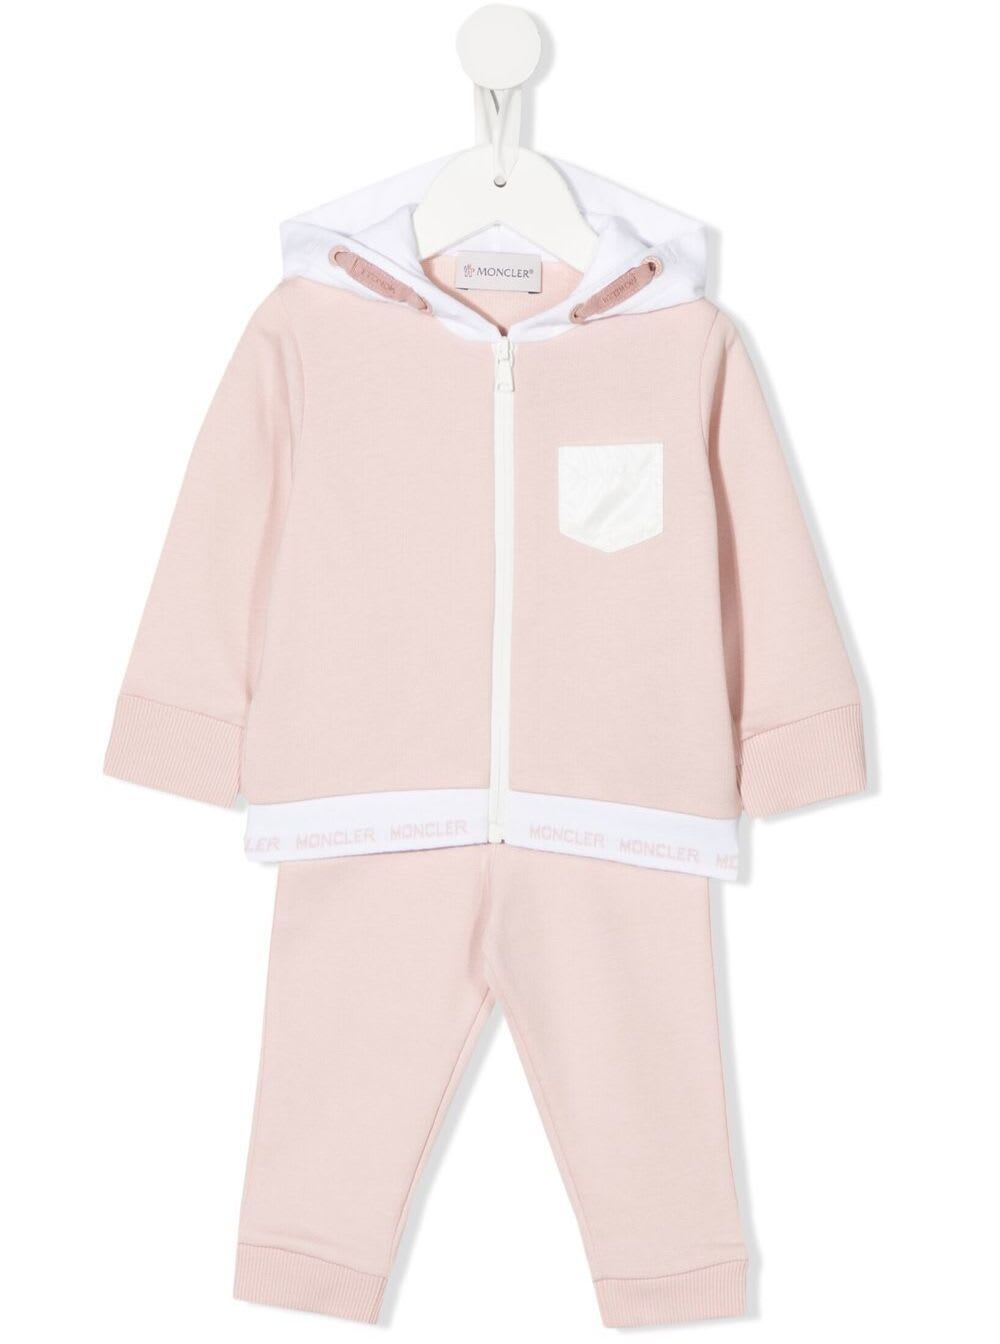 Moncler Kids Baby Girls Pink And White Cotton Coordinated Suit